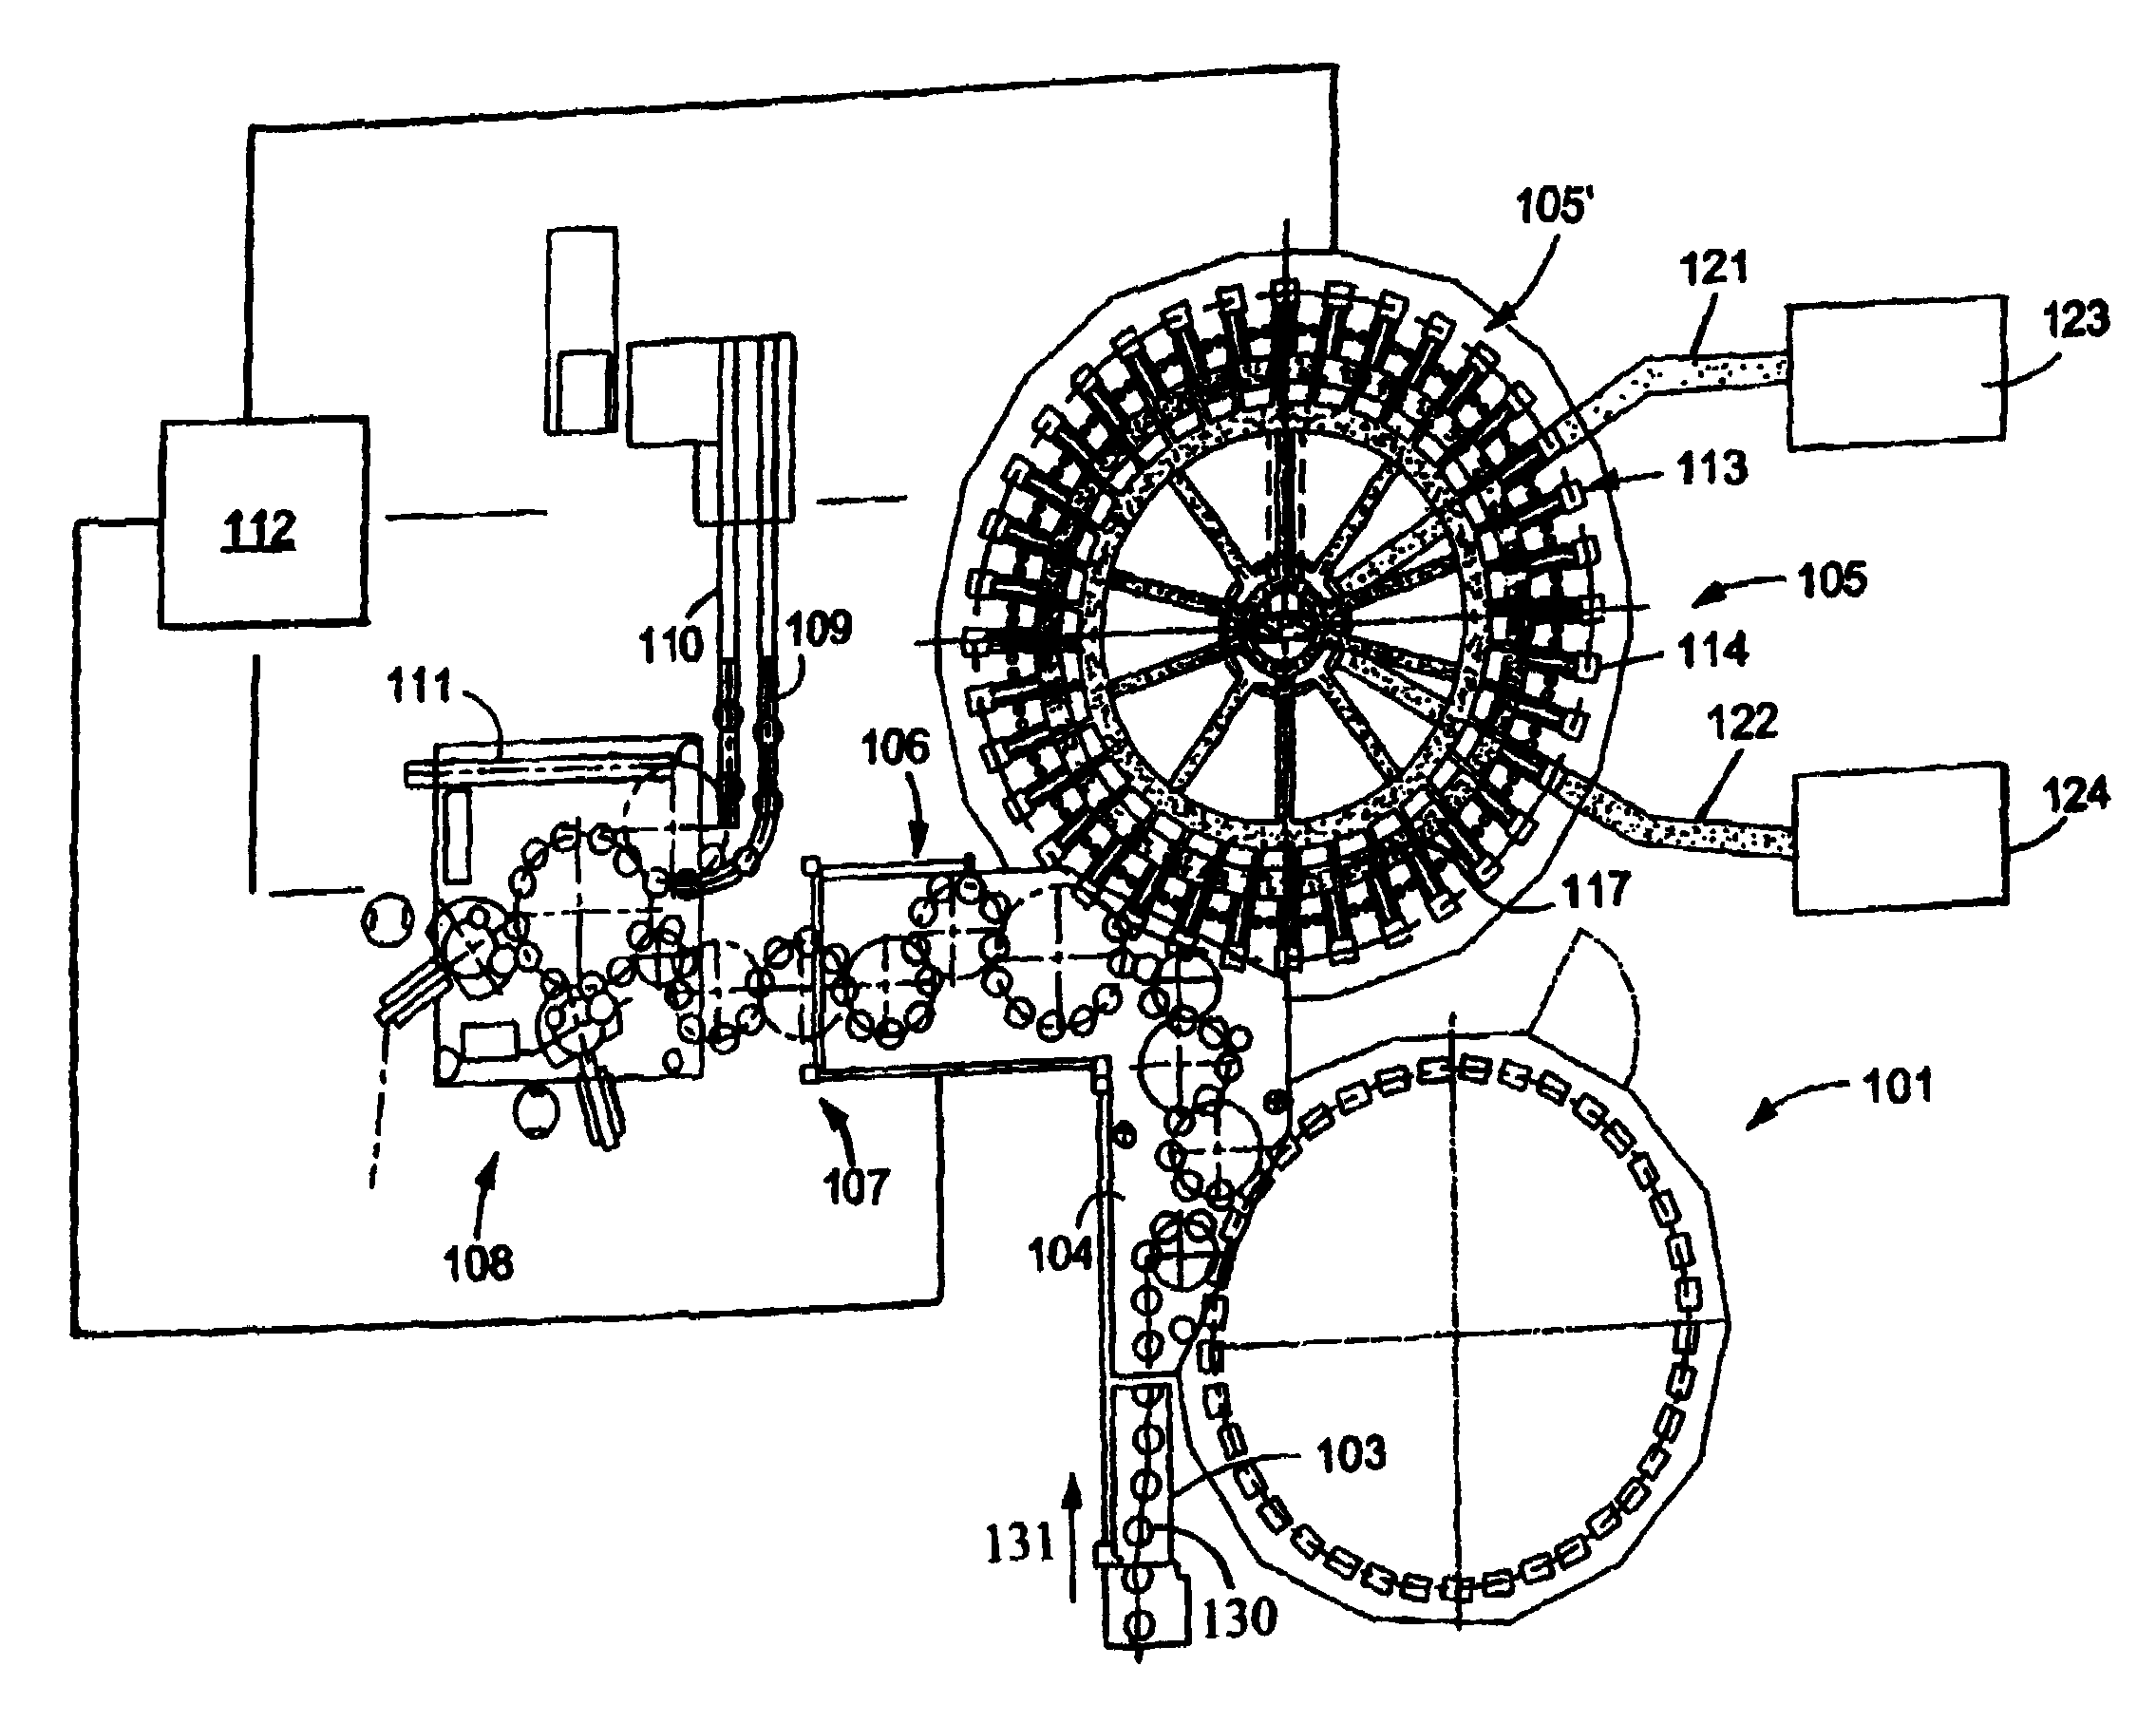 Method of operating a rotary beverage bottle or container filling or handling machine with a bearing with a cleaning arrangement in an aseptic clean room in a beverage bottling or container filling plant